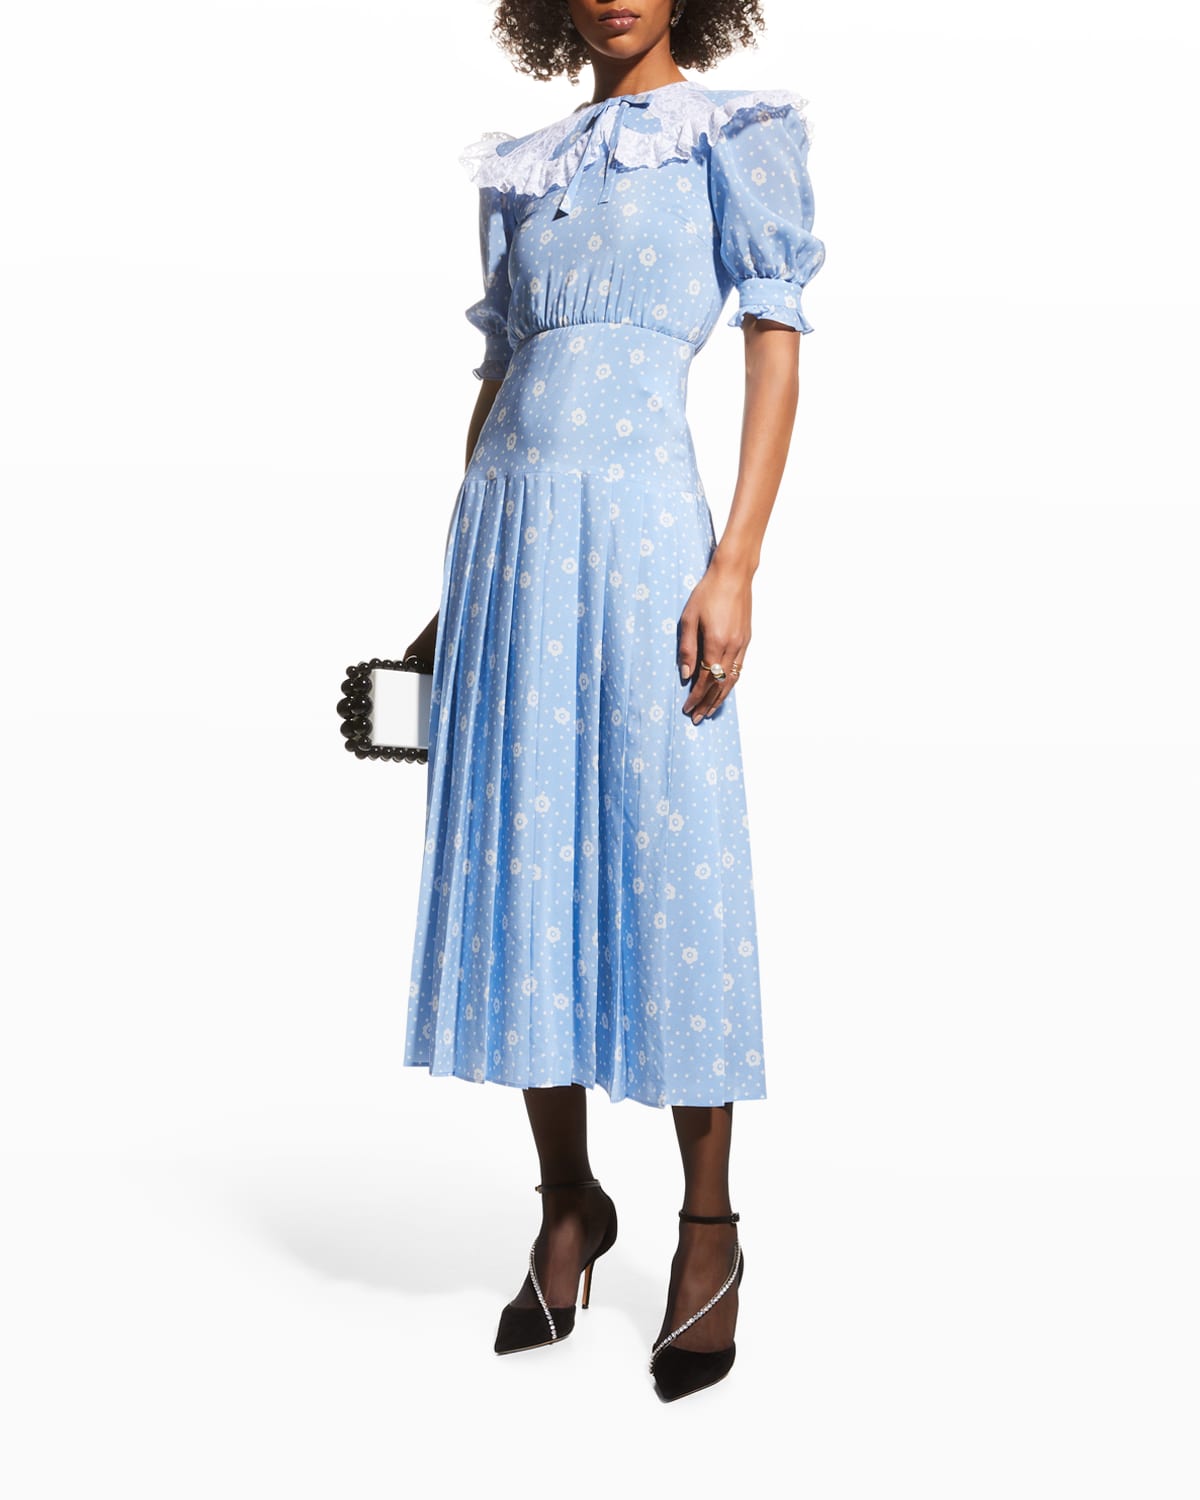 Polka Dot And Daisy Crepe De Chine Dress with Collar | Neiman Marcus